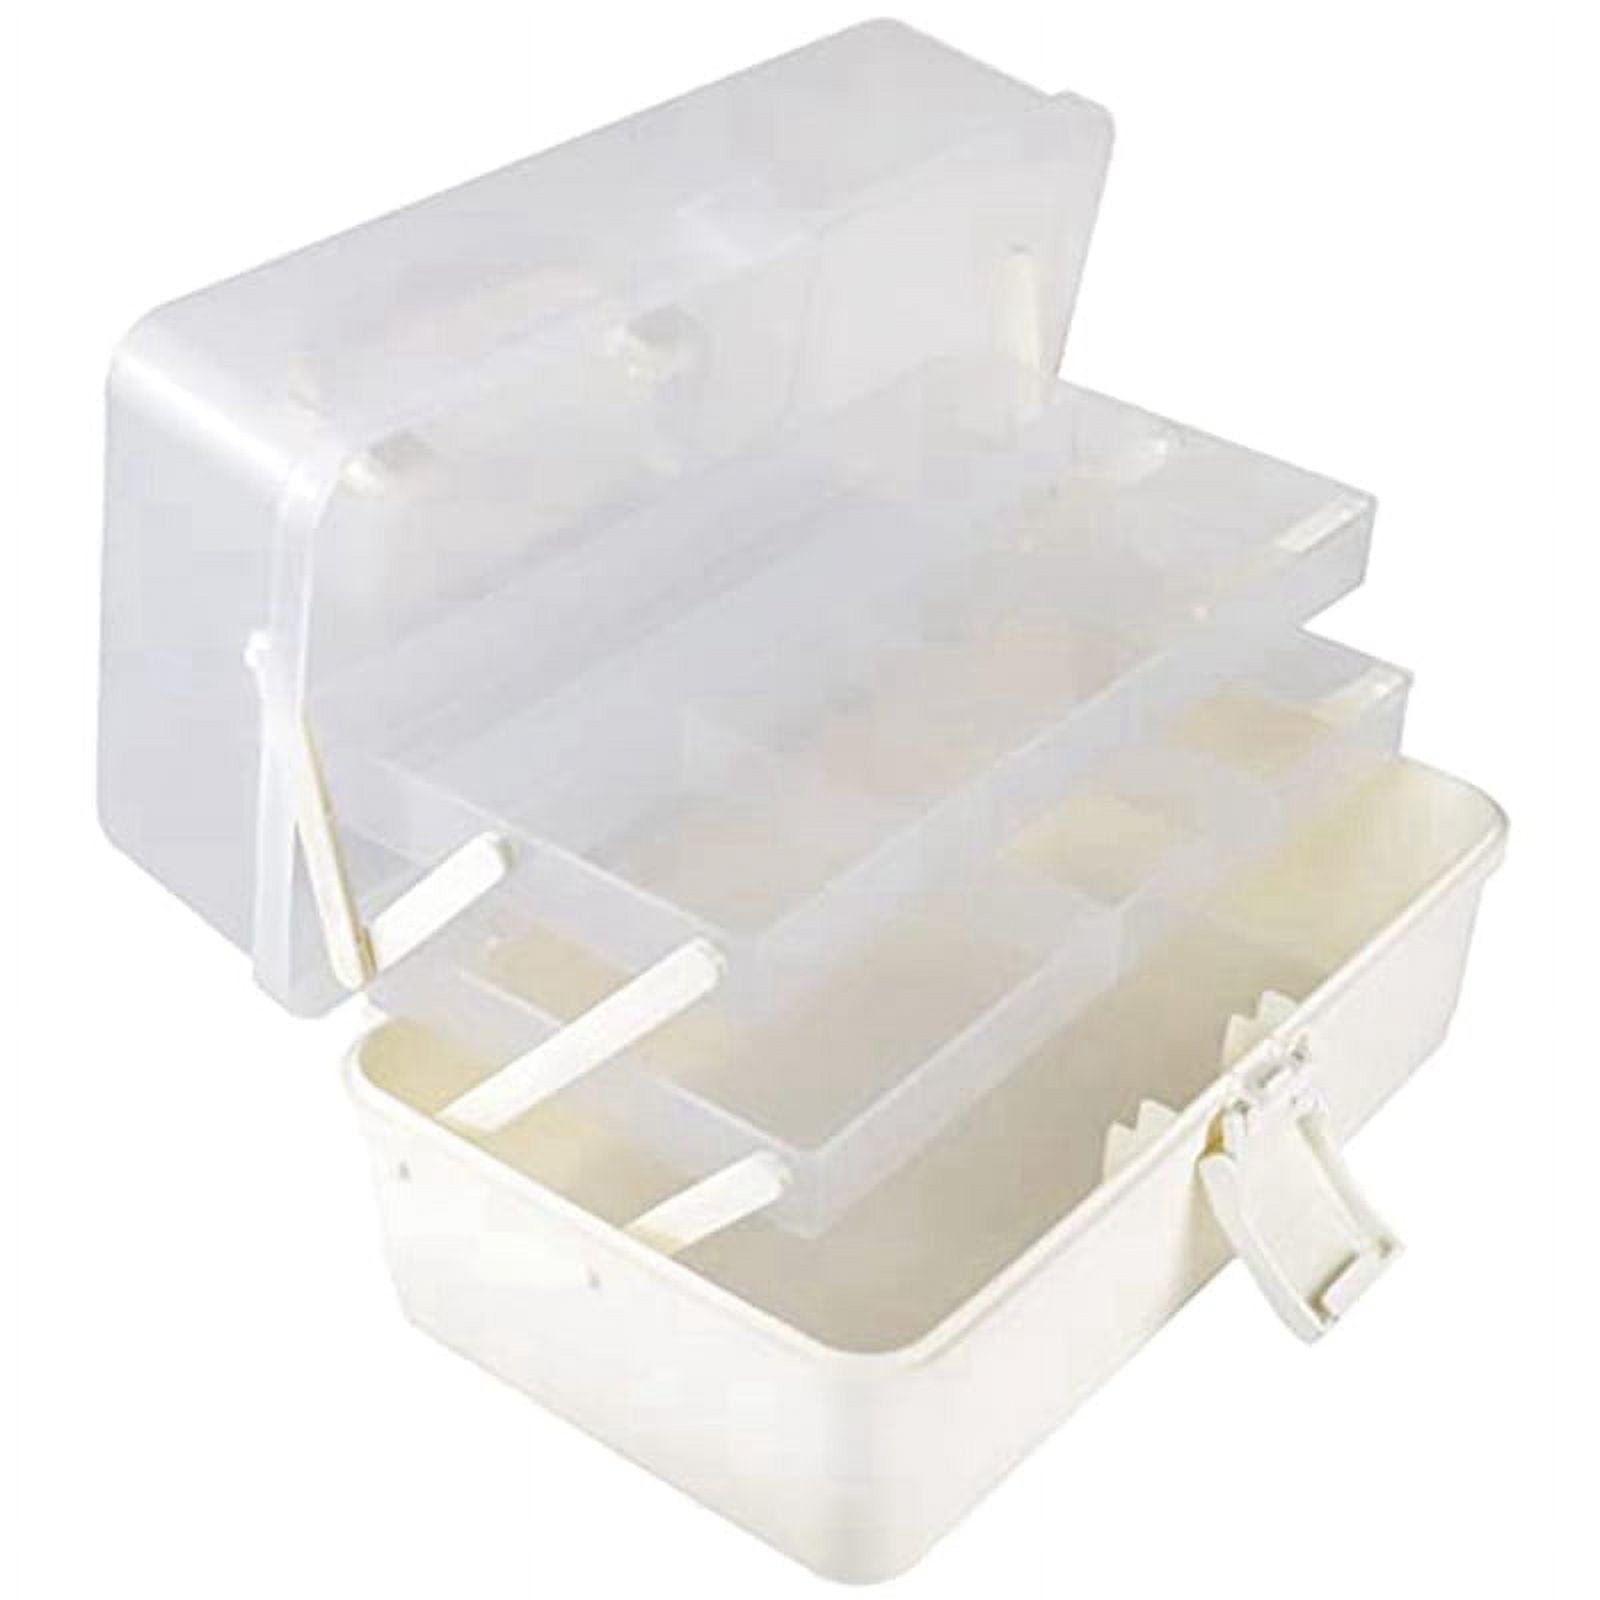 Wholesale craft tackle boxes To Store Your Fishing Gear 